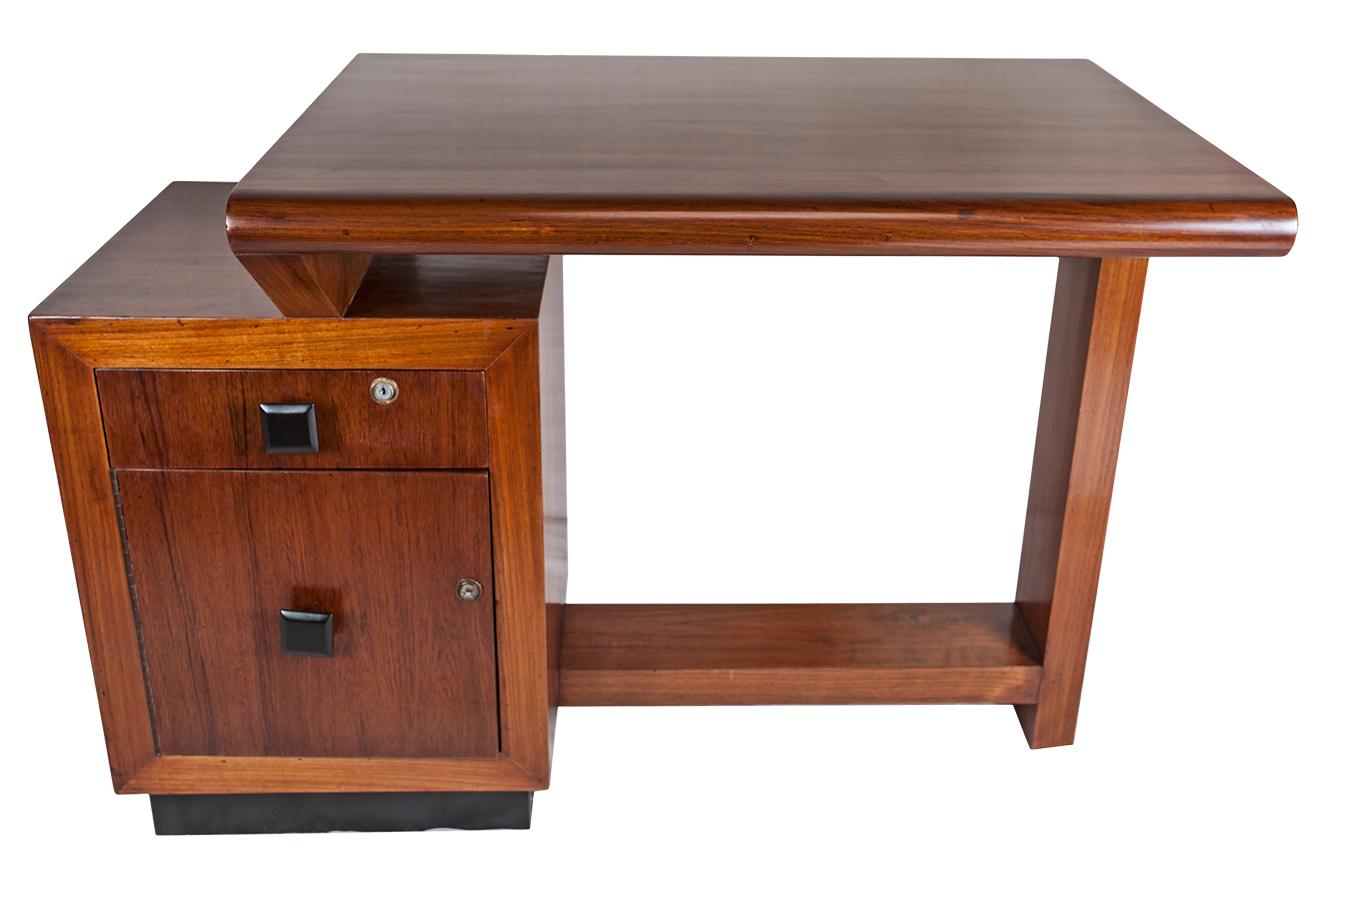 A teak wood asymmetrical desk with ebonized base and drawer pulls. Left side top drawer and cabinet below. Locks and keys for both. Lower left side is 24